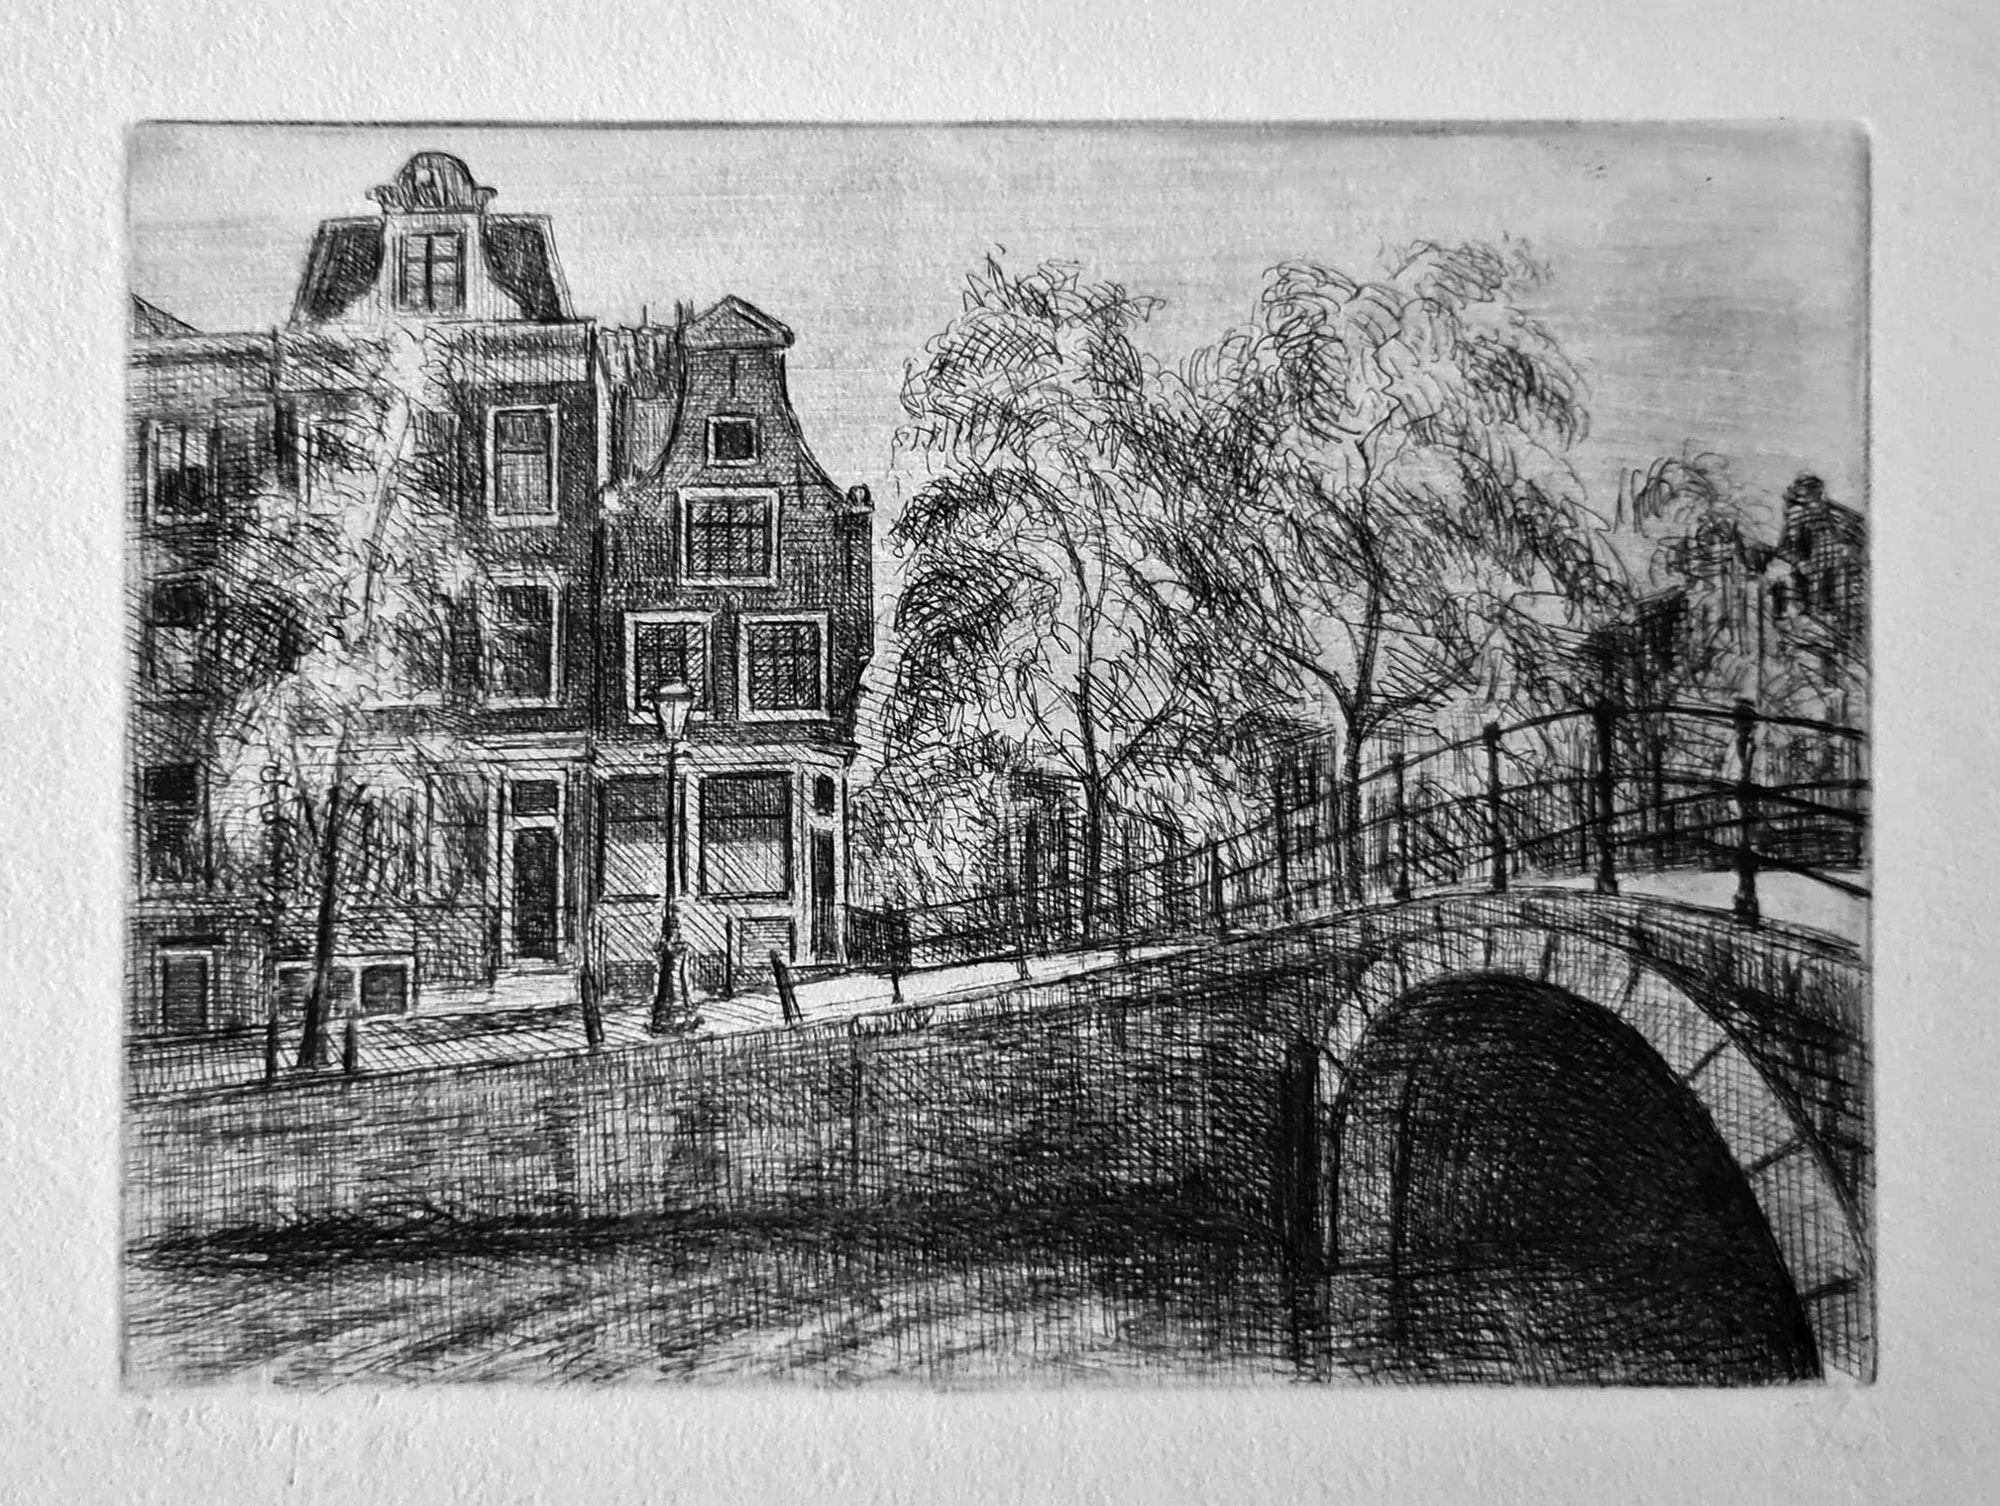 Featured image for “Gracht Amsterdam”